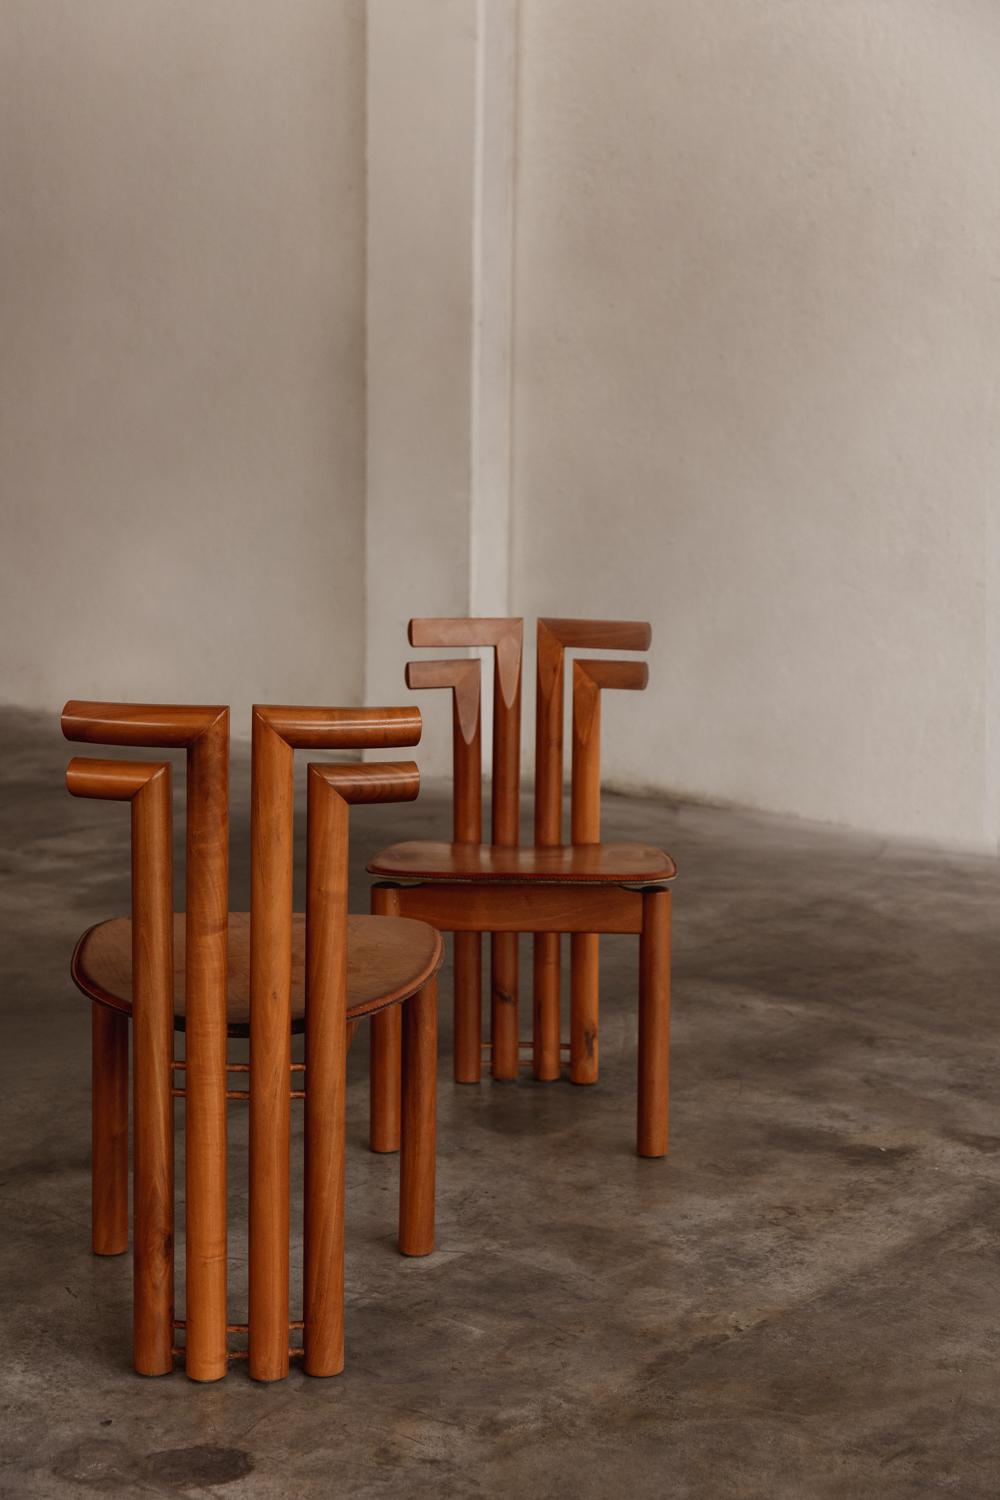 Mario Marenco “Sapporo” Dining Chairs for Mobil Girgi, 1970, set of 2 For Sale 2